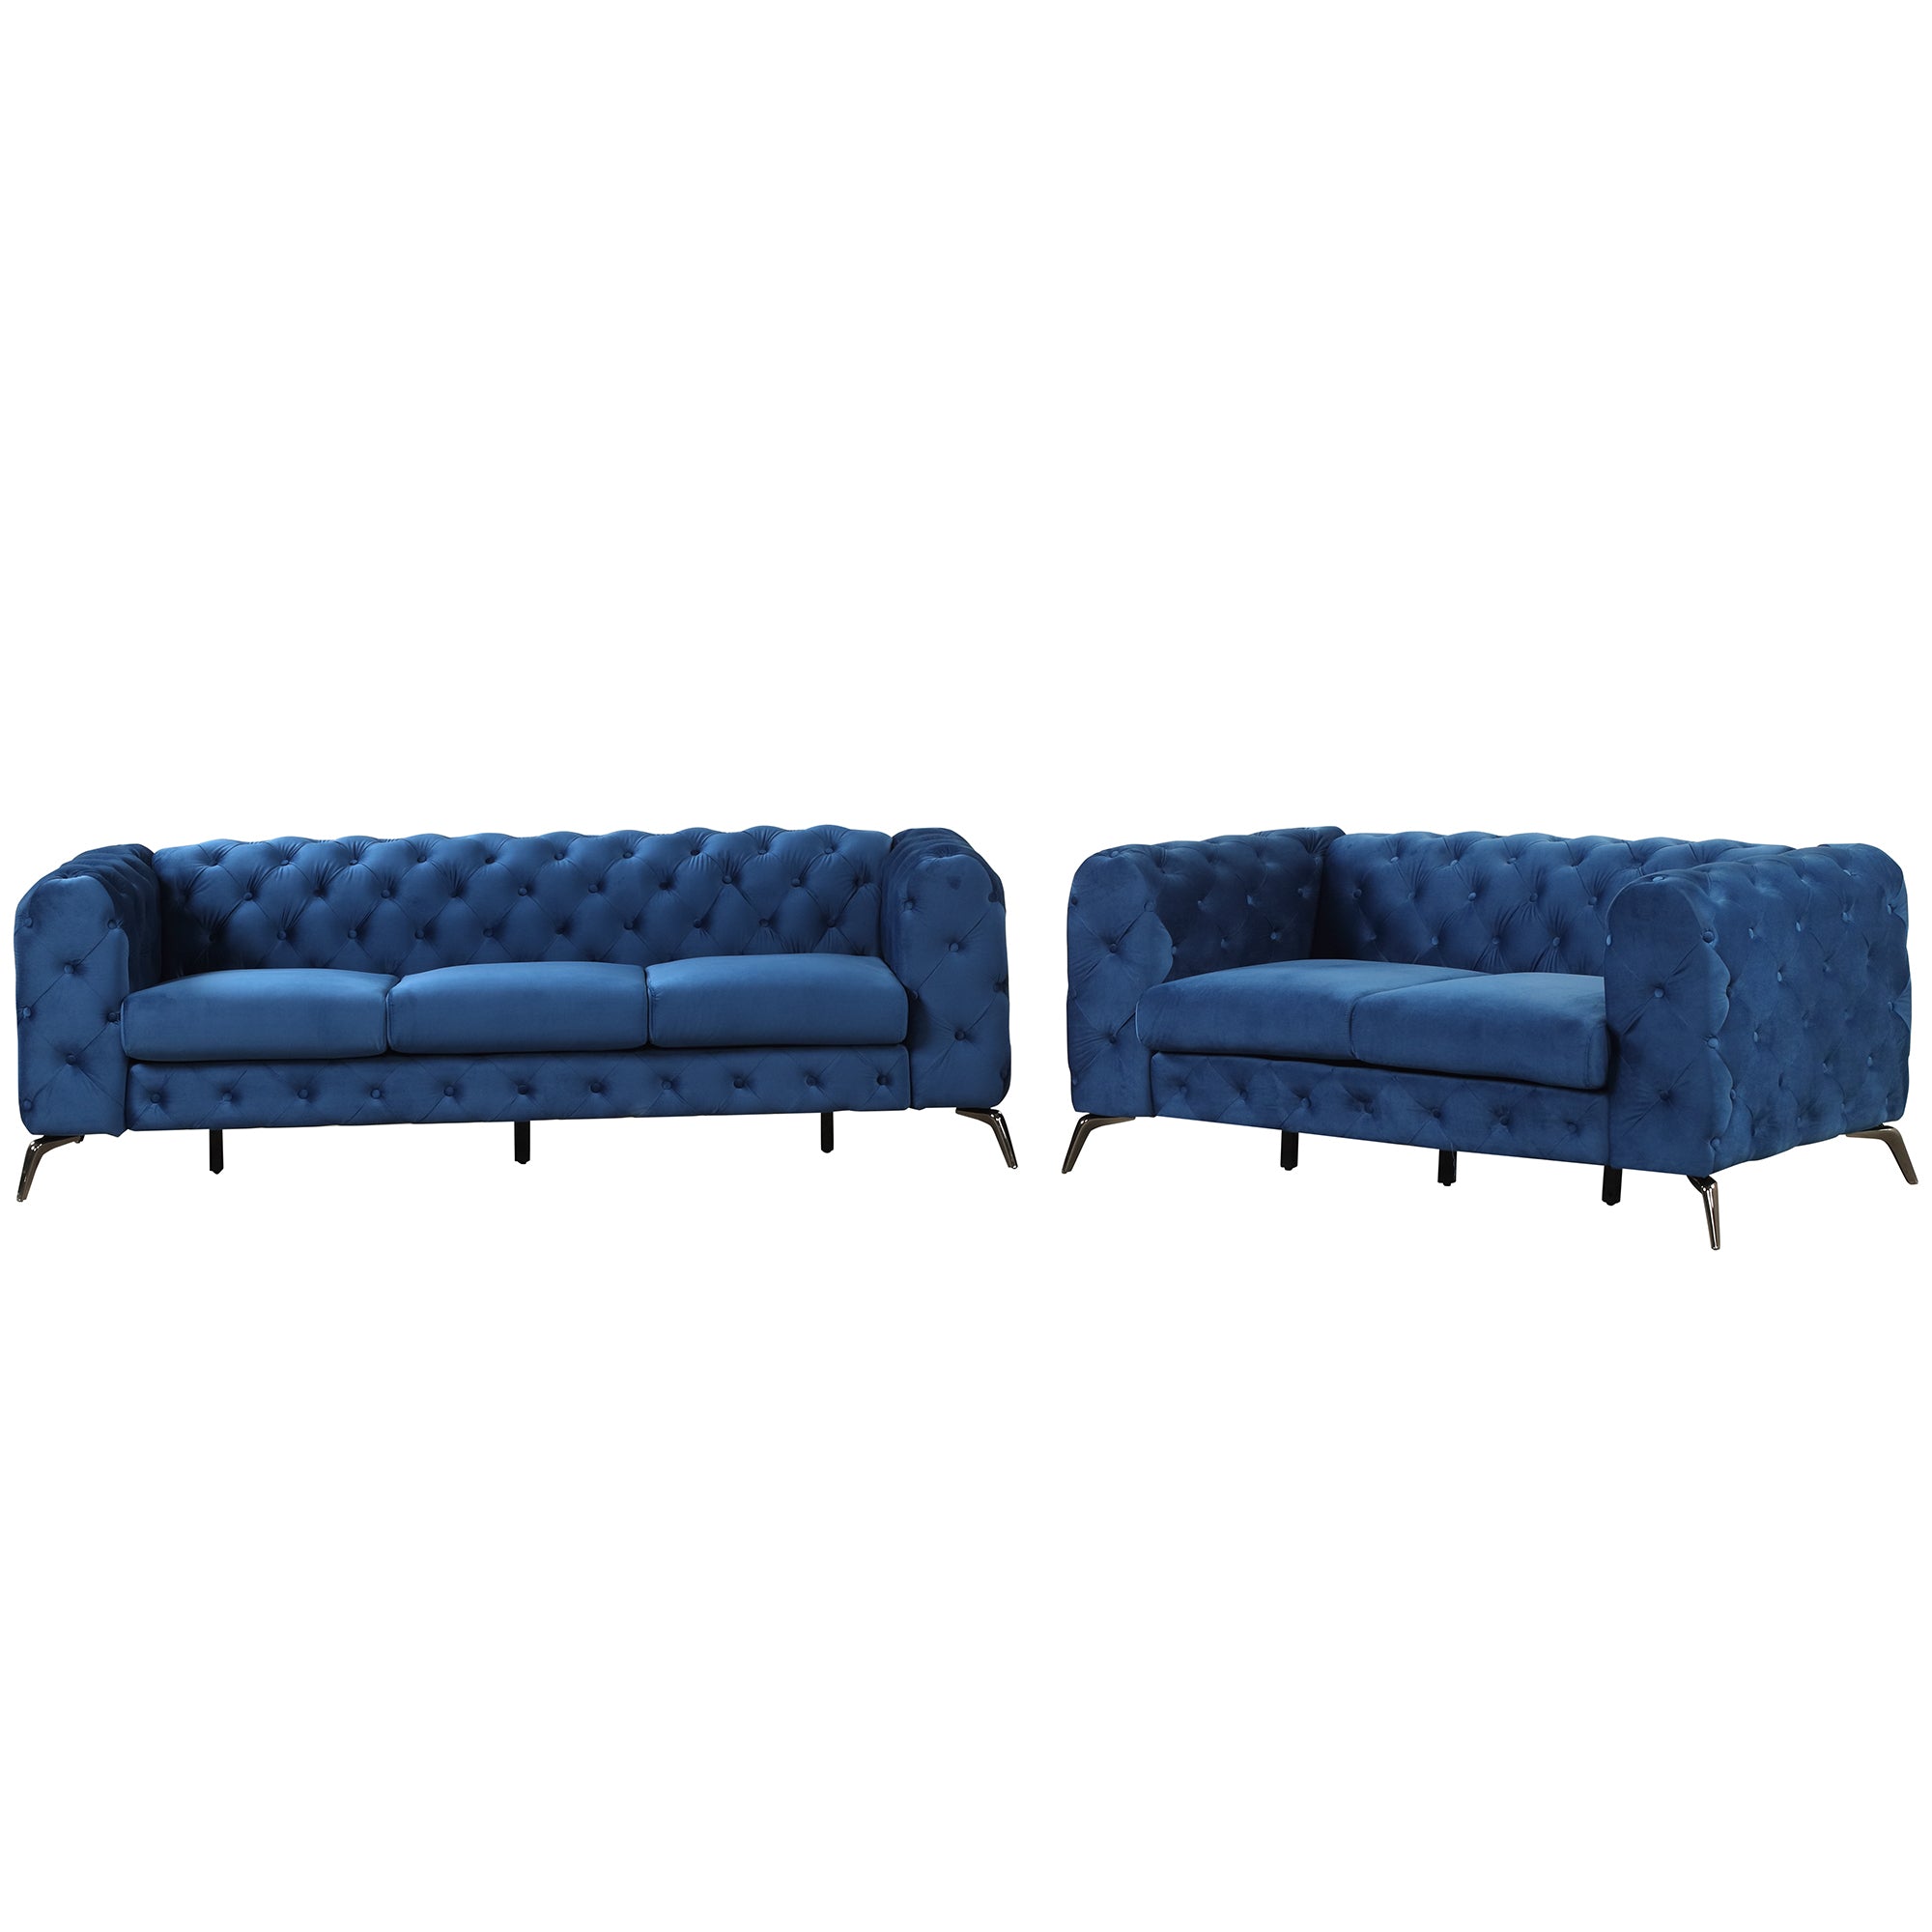 Modern 3-Piece Sofa Sets with Sturdy Metal Legs,Velvet Upholstered Couches Sets Including Three Seat Sofa, Loveseat and Single Chair for Living Room Furniture Set,Blue